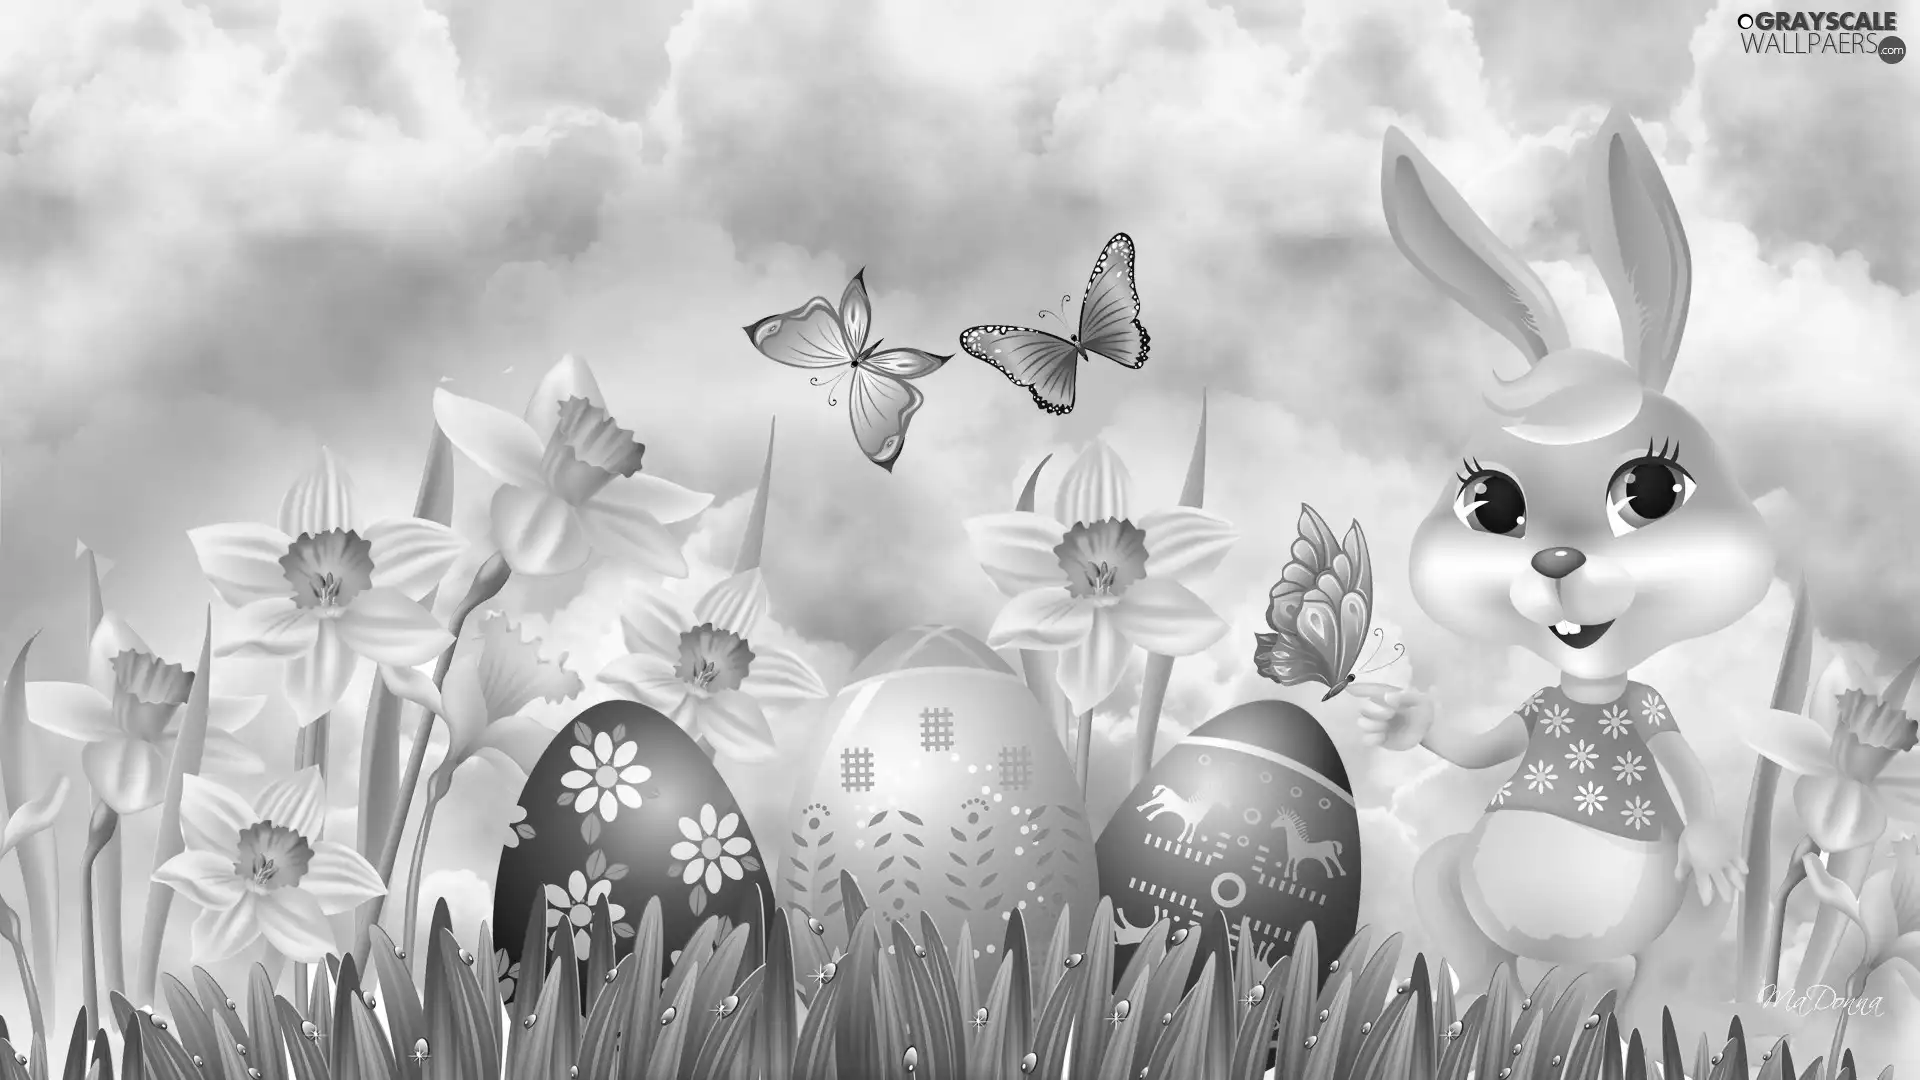 eggs, Easter, rabbit, Daffodils, butterfly, color